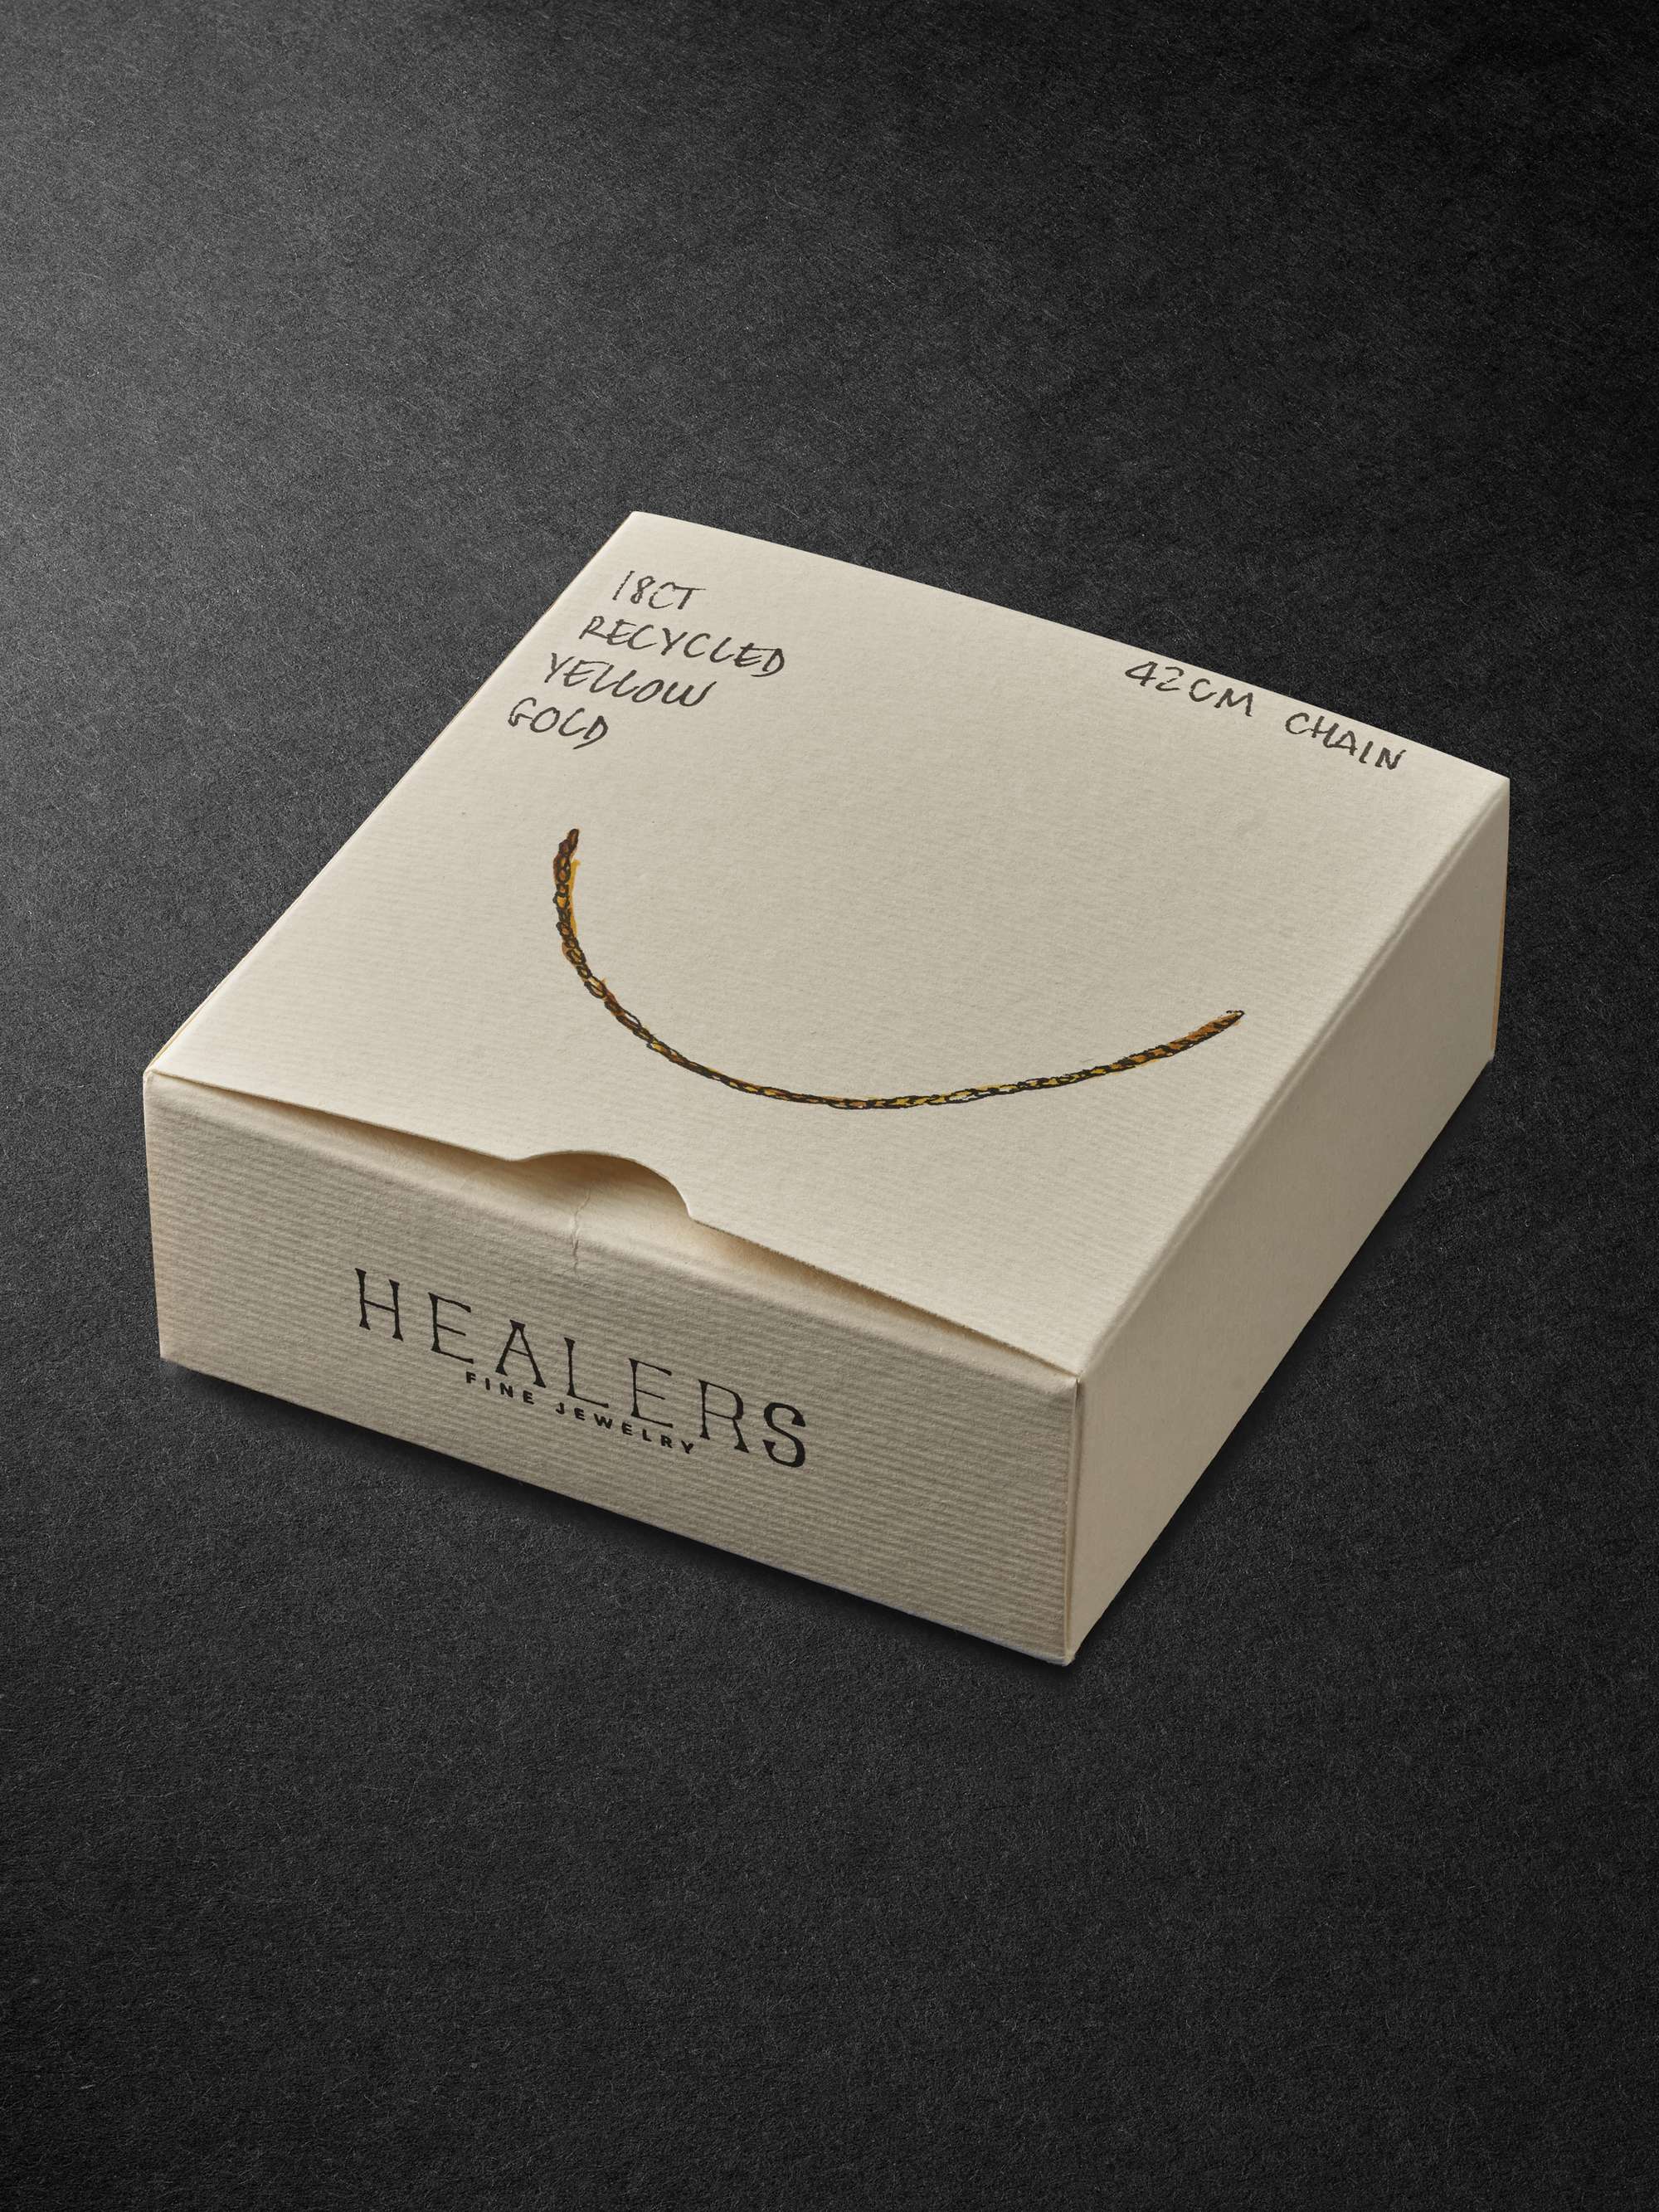 HEALERS FINE JEWELRY Recycled Gold Chain Necklace